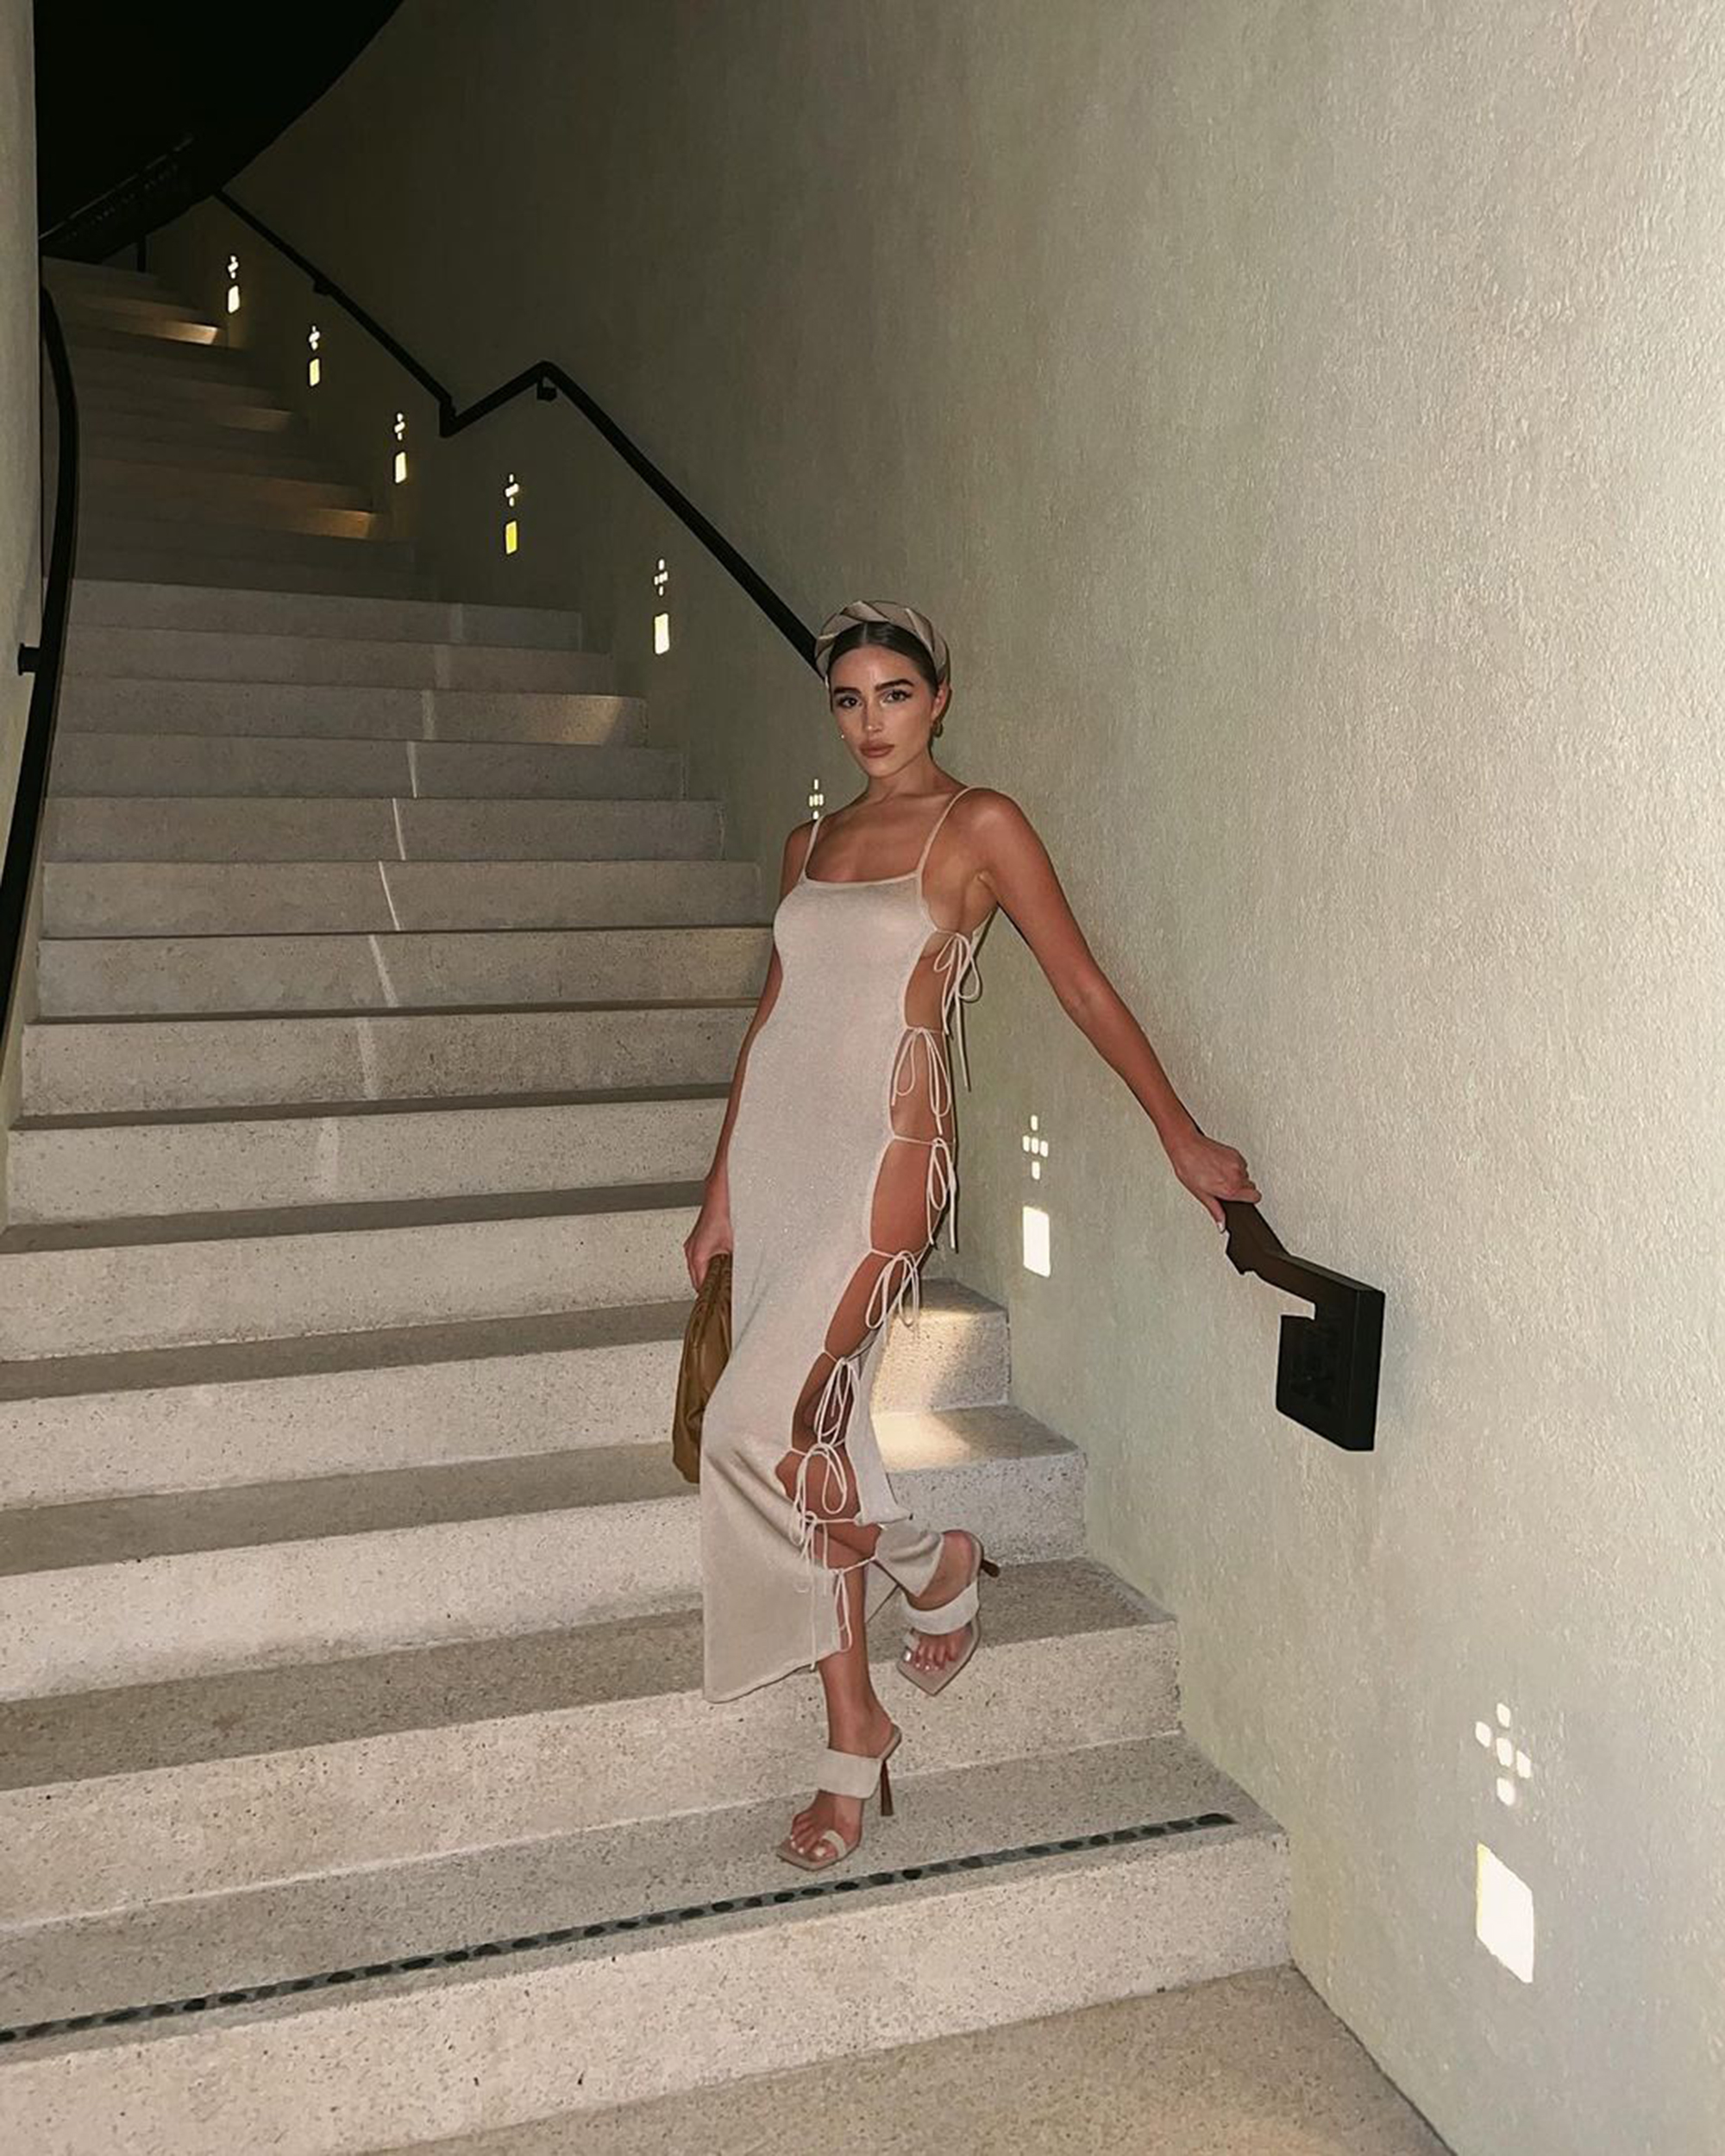 Olivia Culpo shades American Airlines in sexy open-sided dress